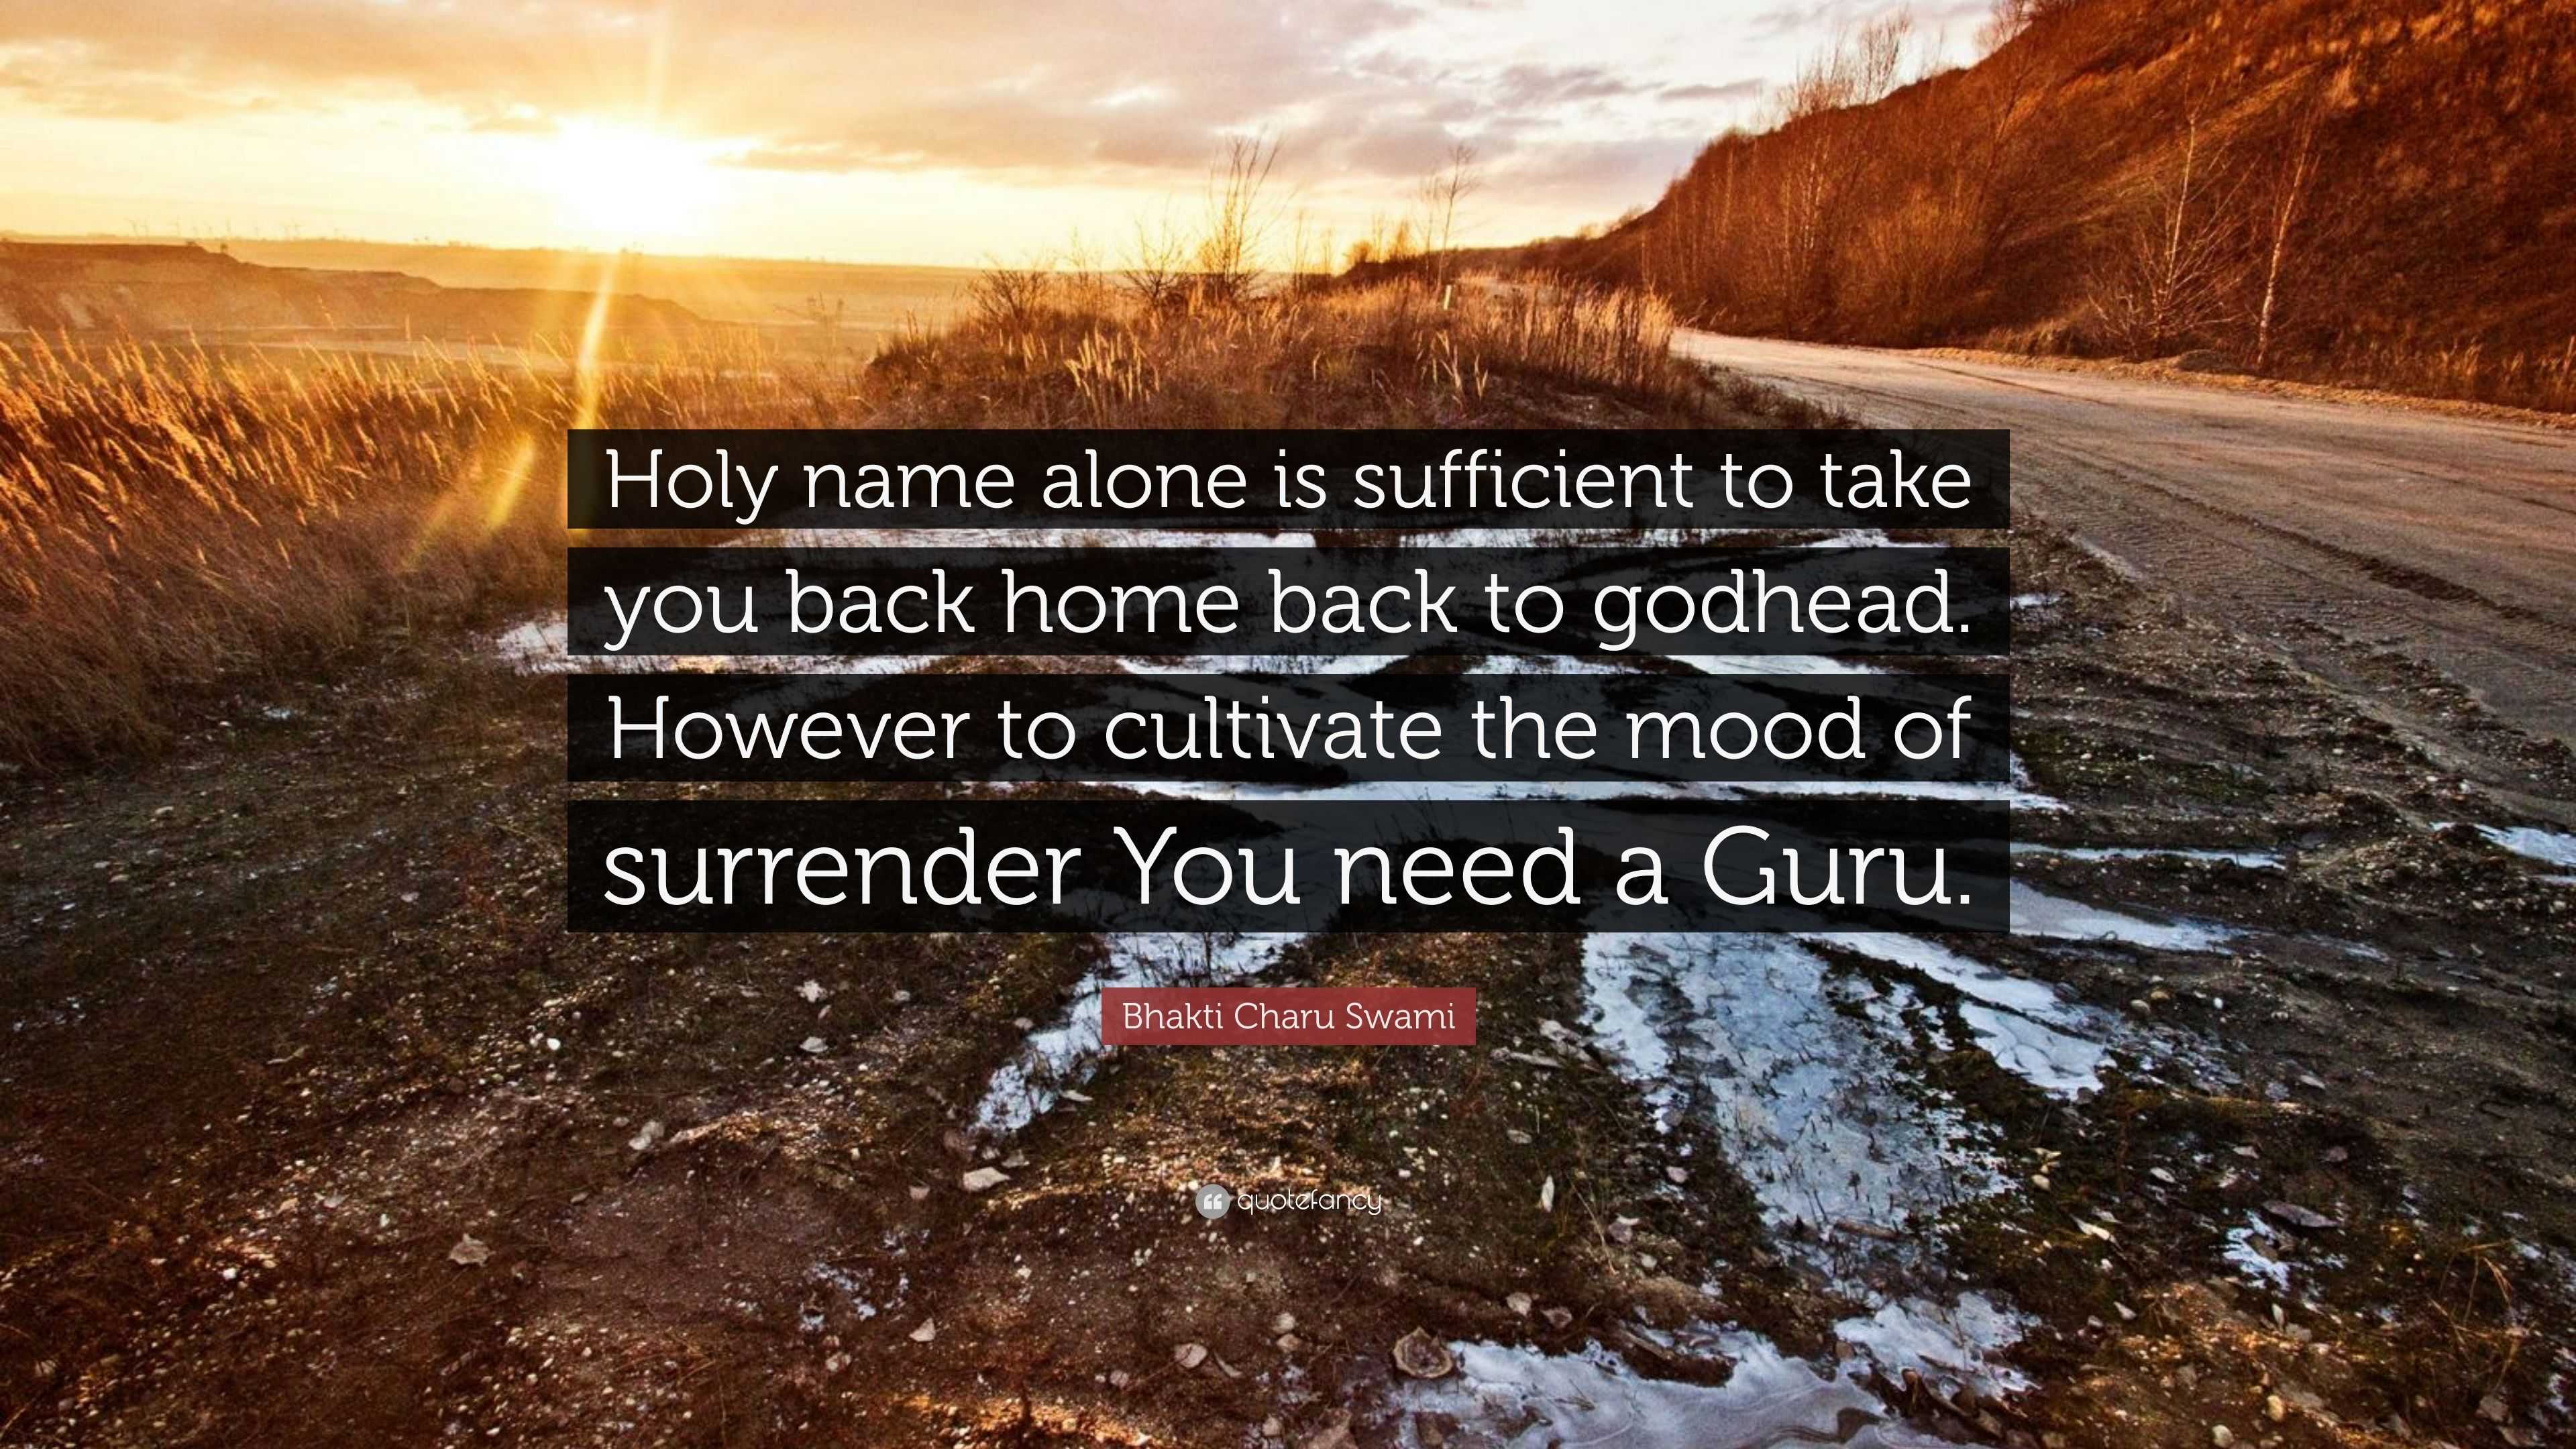 Bhakti Charu Swami Quote: “Holy name alone is sufficient to take you back  home back to godhead. However to cultivate the mood of surrender You  need...”